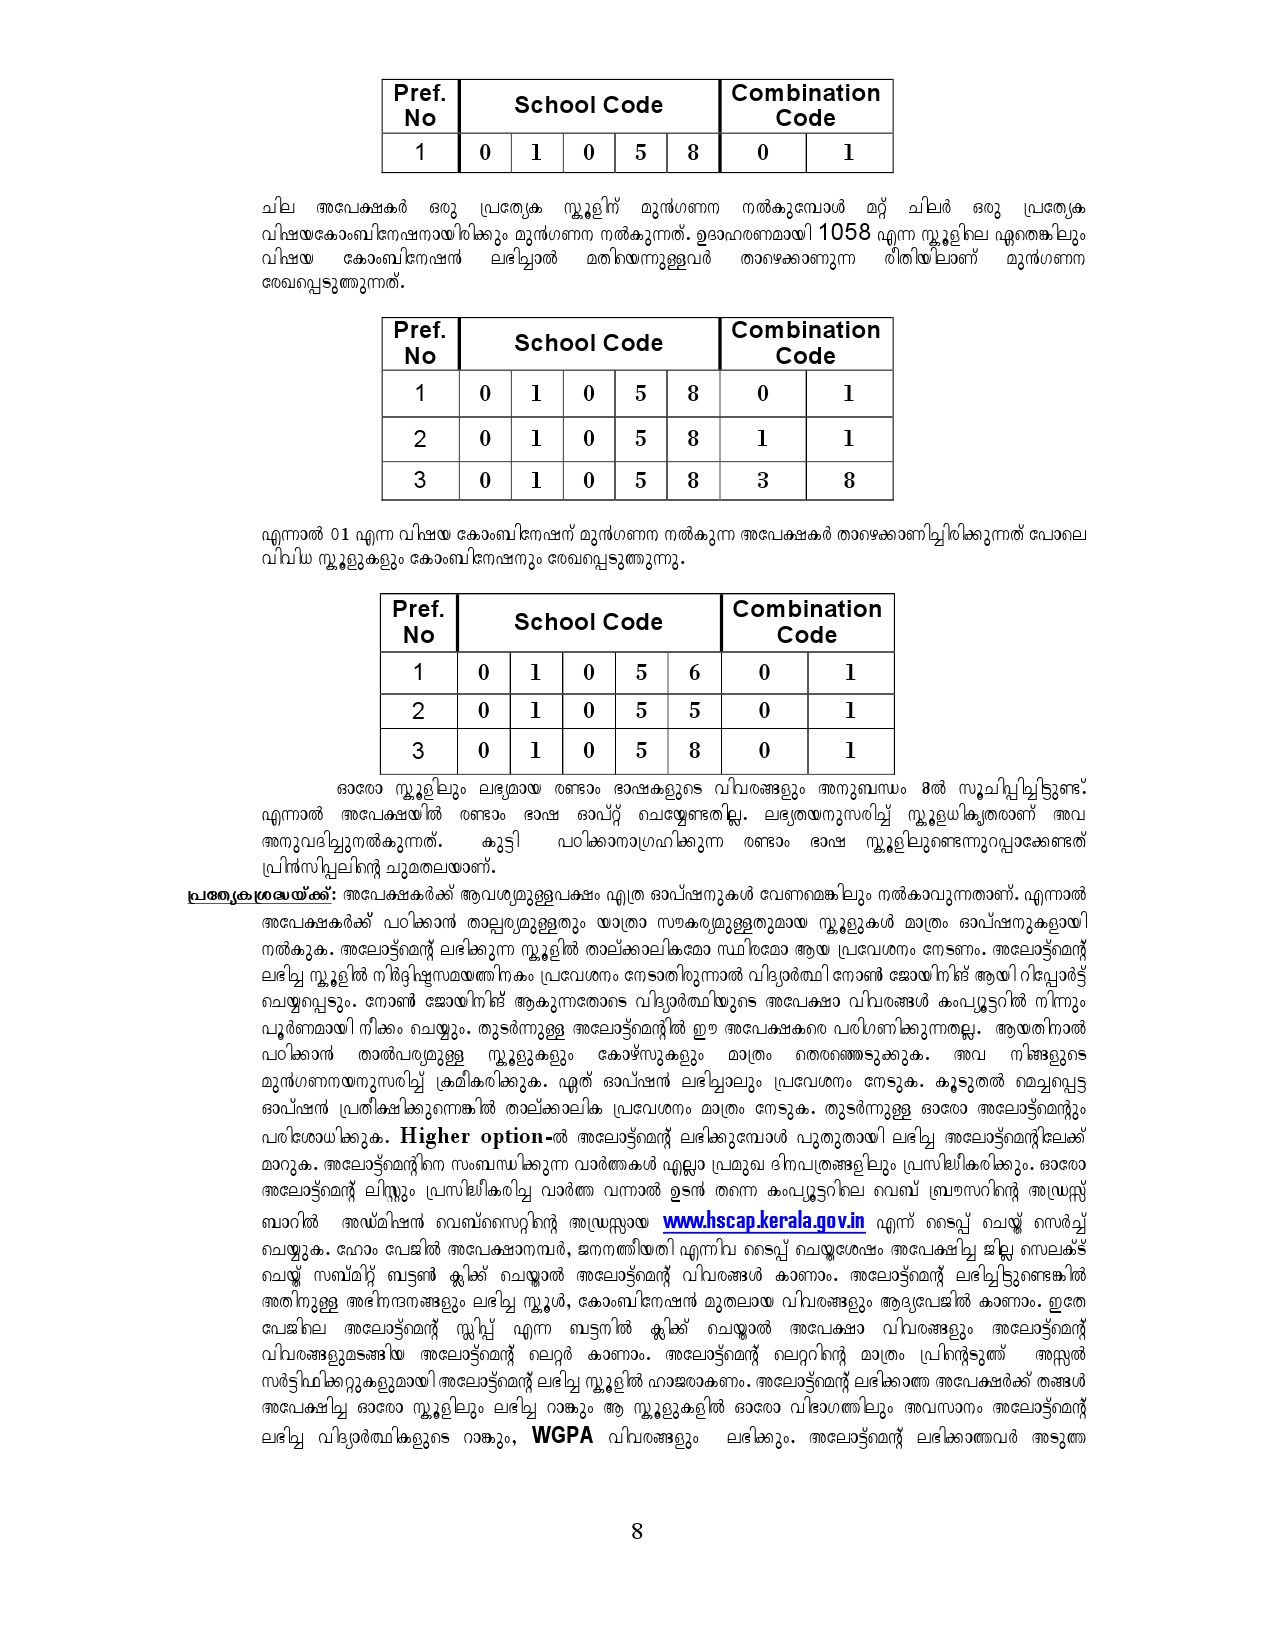 Higher Secondary School Online Application Manual in Malayalam - Notification Image 8